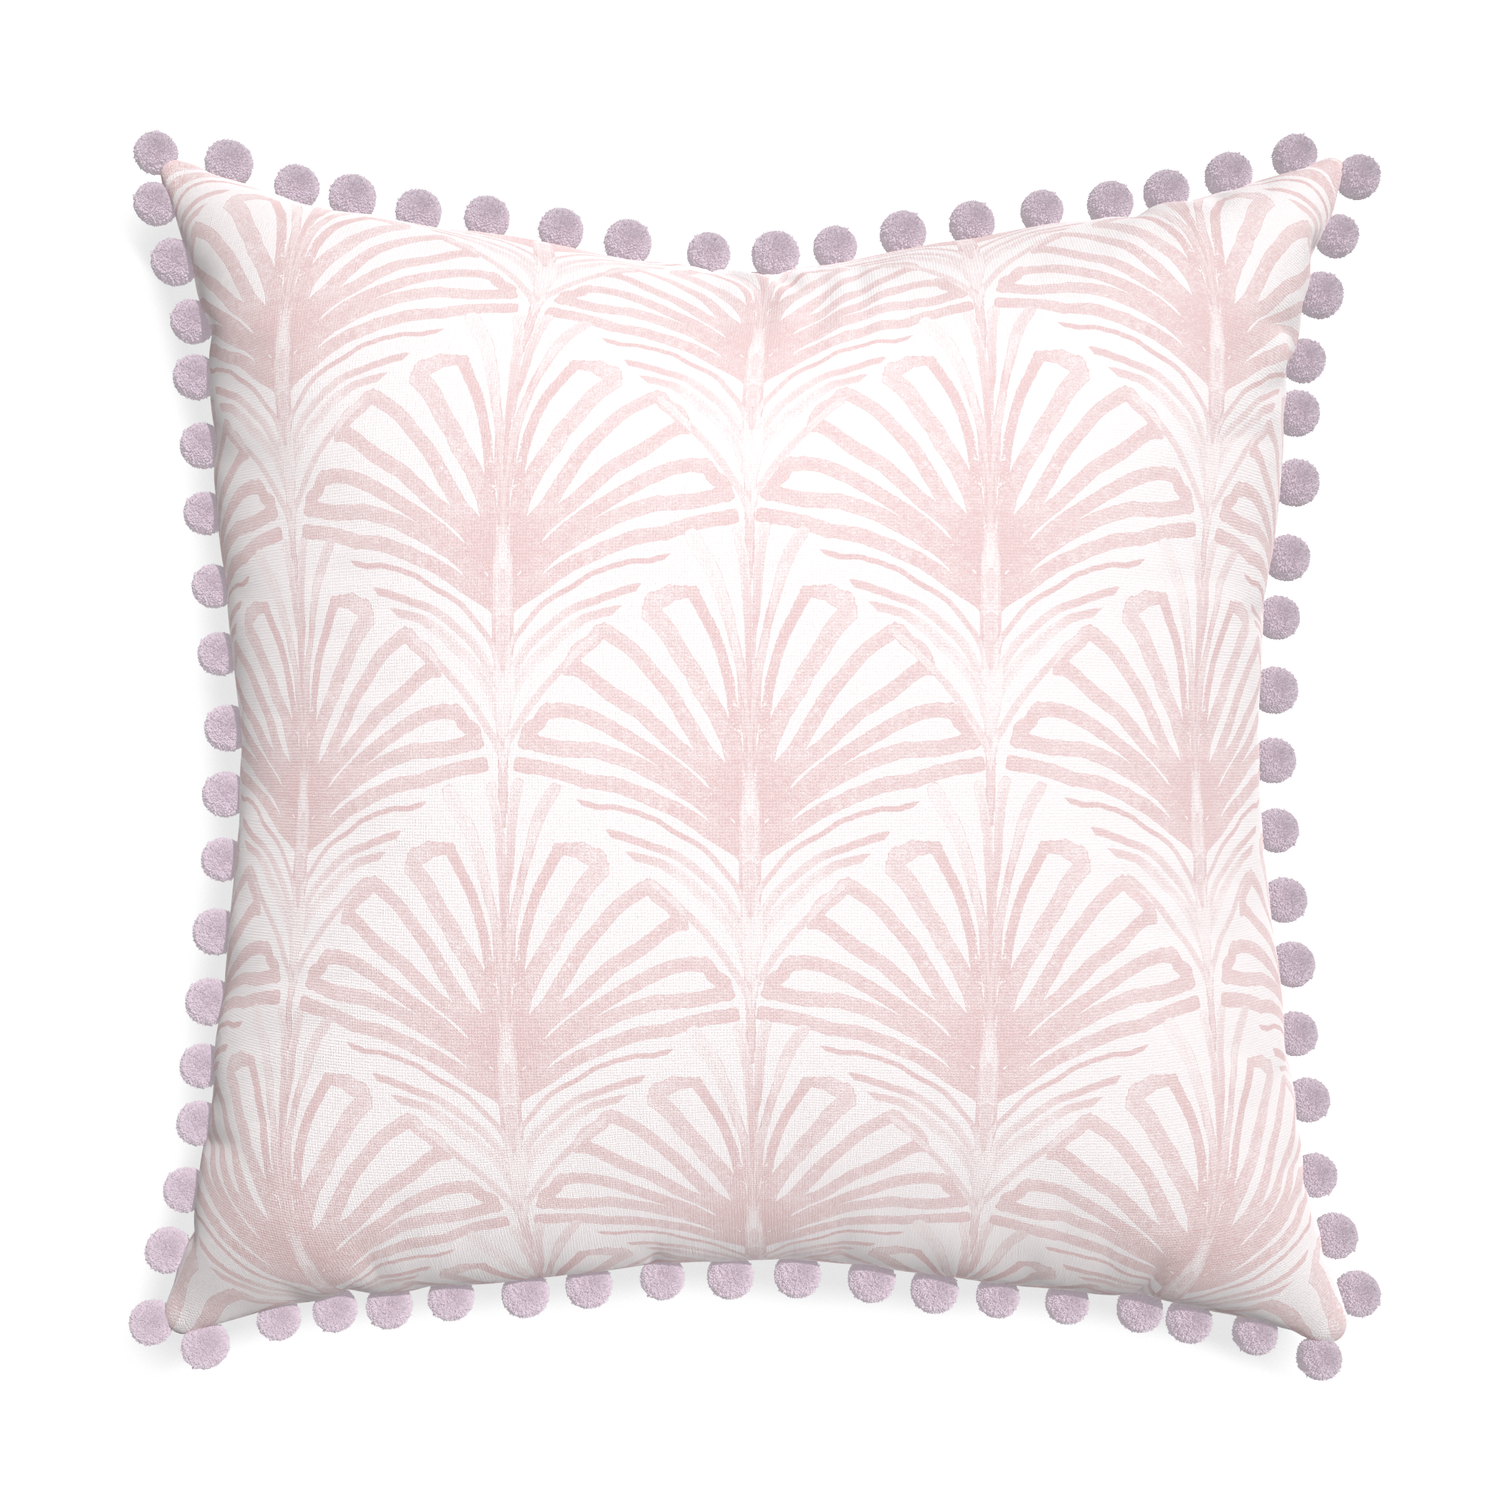 Euro-sham suzy rose custom pillow with l on white background